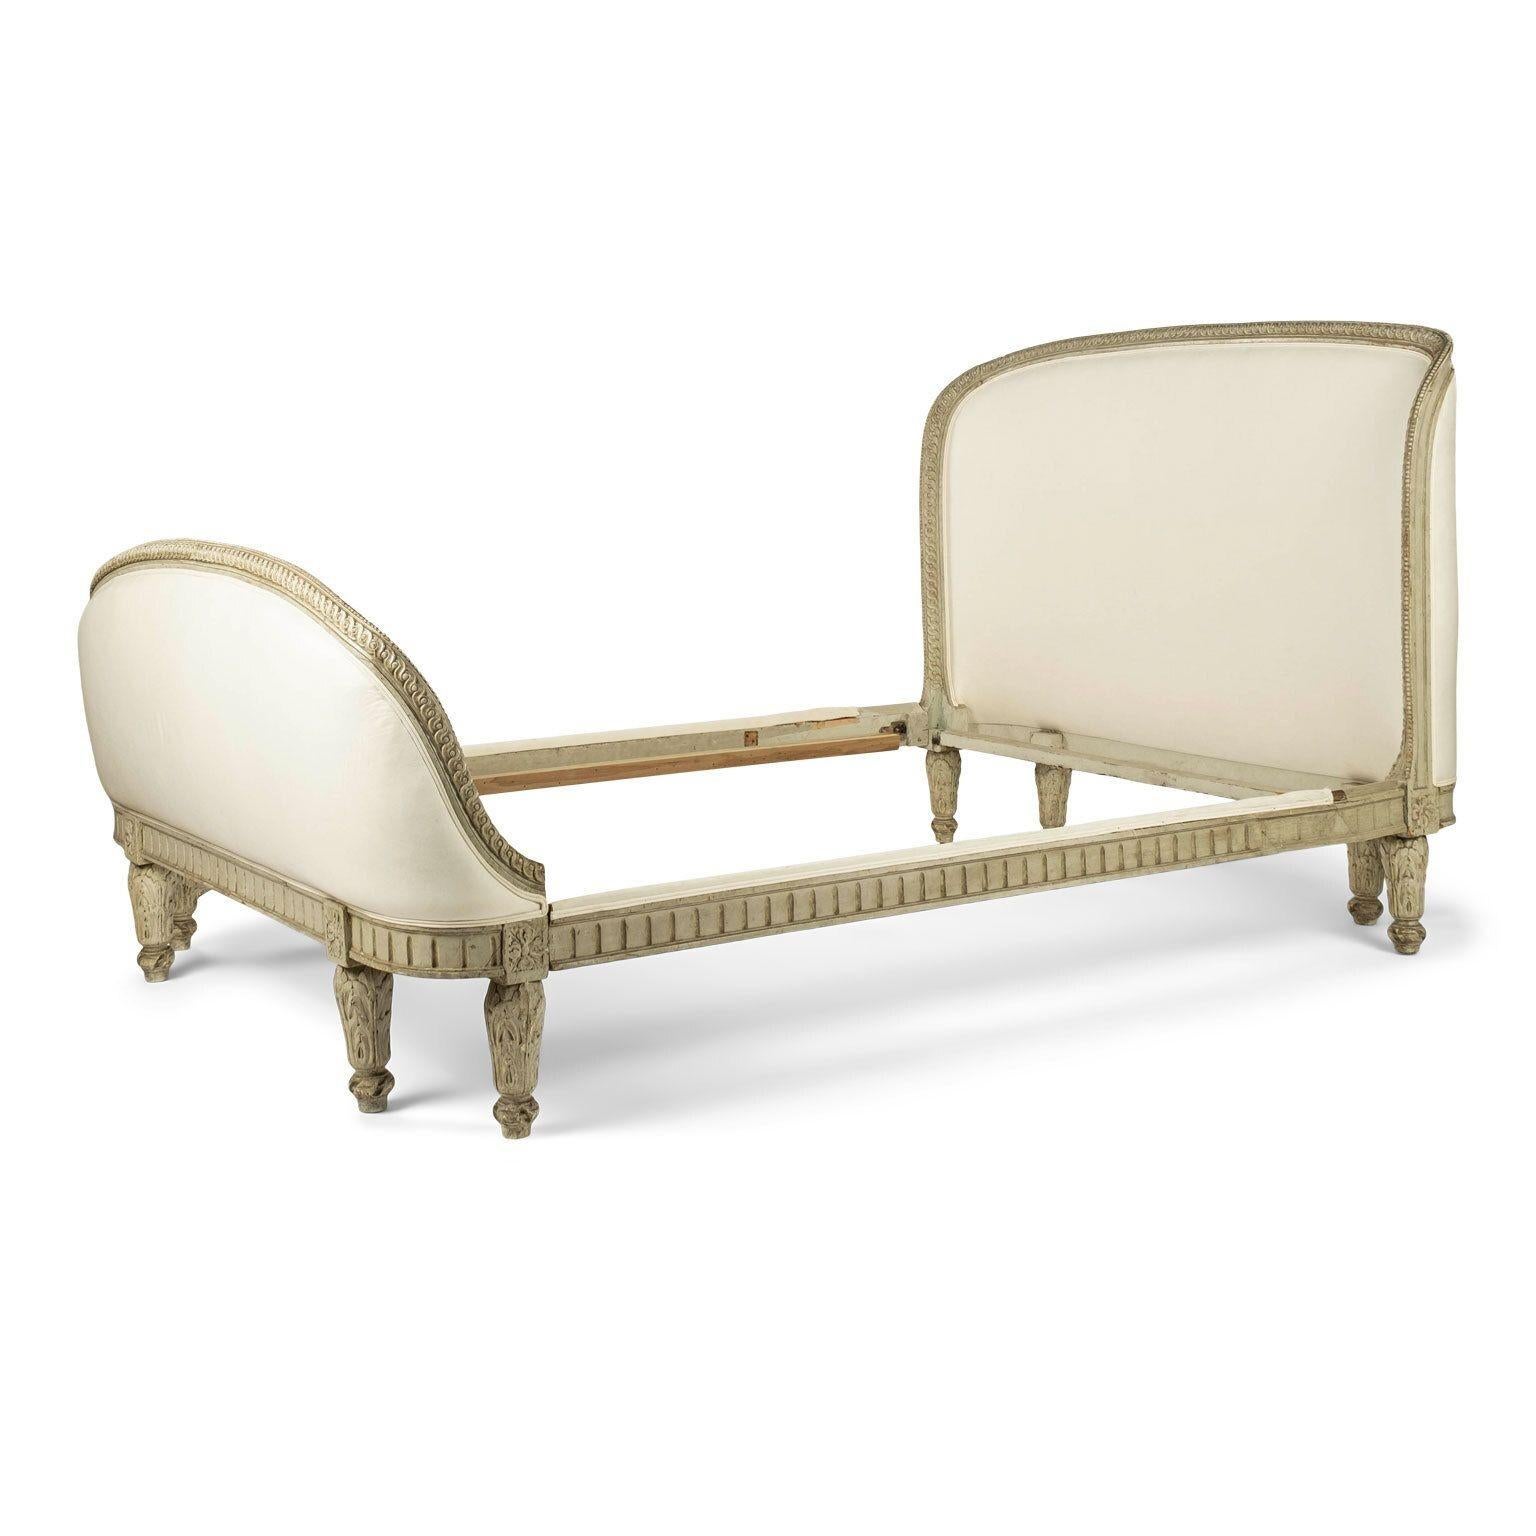 Louis XVI style green-gray painted full size (double) bed dating to late 19th century. Intricately hand-carved side rails, head and foot boards. Later - but not recent - green-gray painted finish. Upholstered in off-white muslin. Accommodates a full